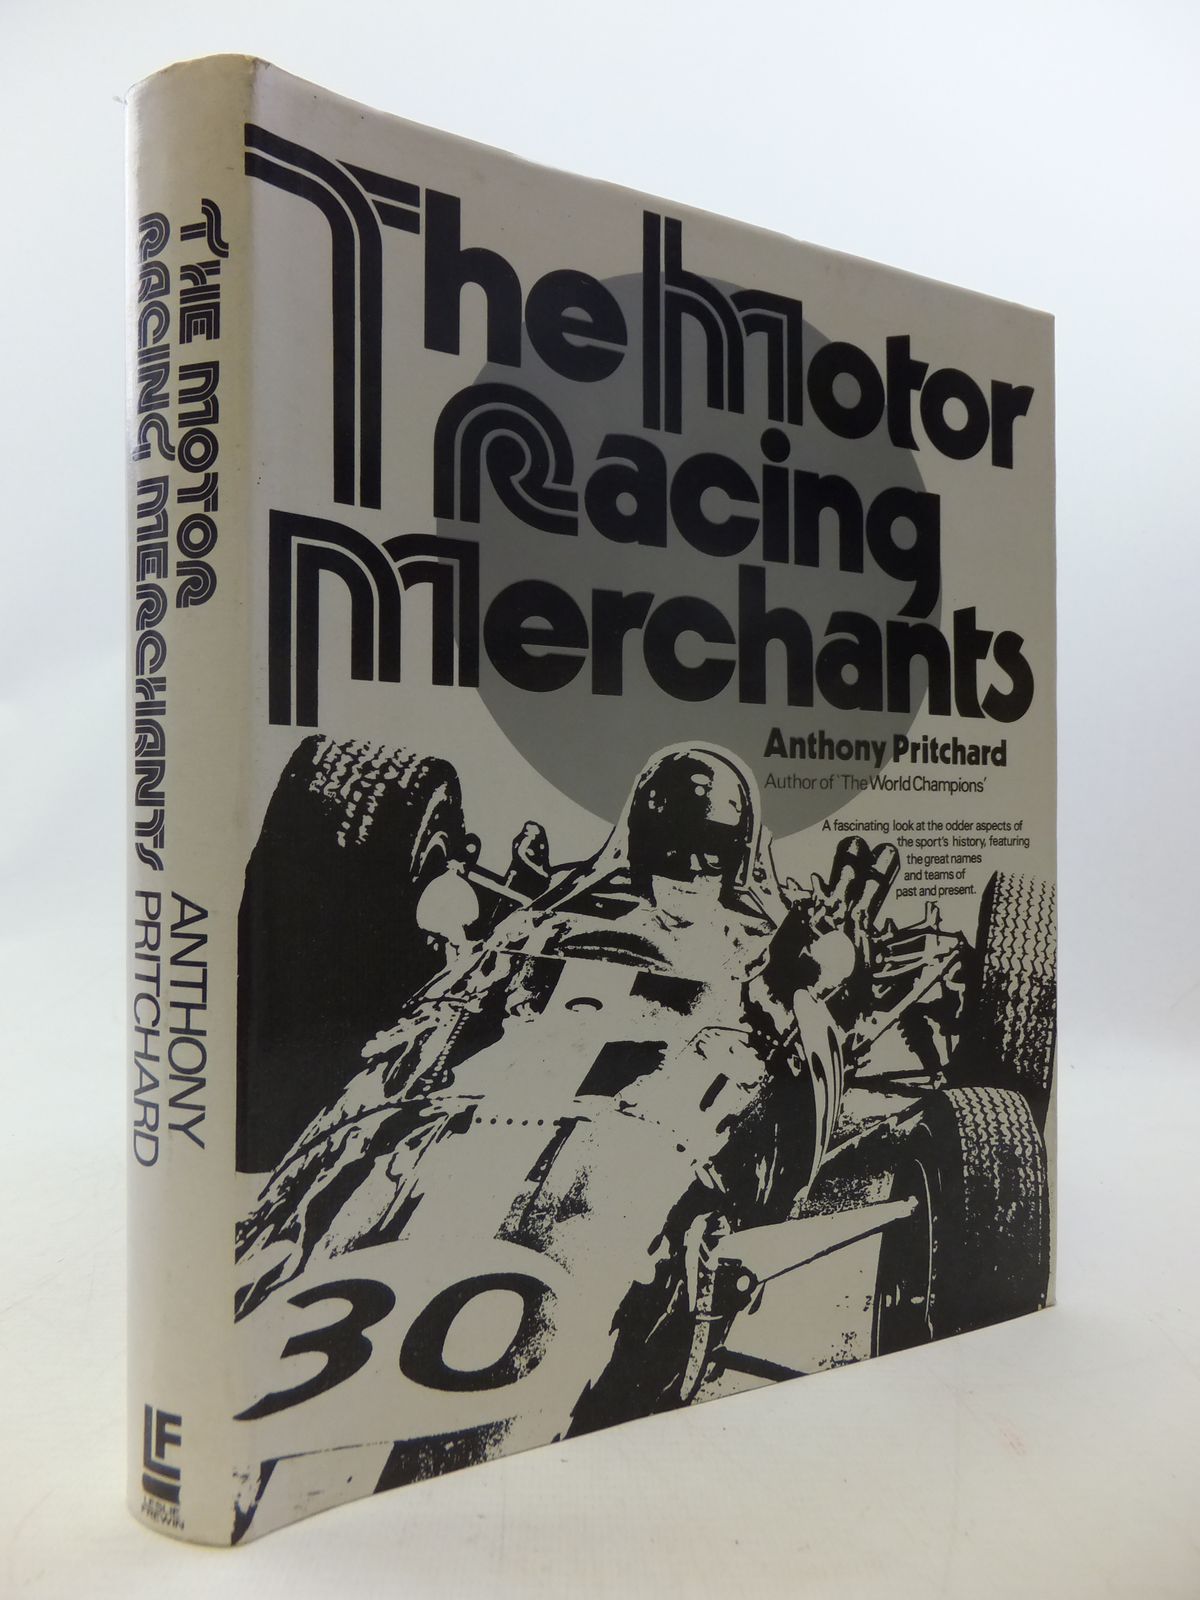 Photo of THE MOTOR RACING MERCHANTS written by Pritchard, Anthony published by Leslie Frewin (STOCK CODE: 1808992)  for sale by Stella & Rose's Books